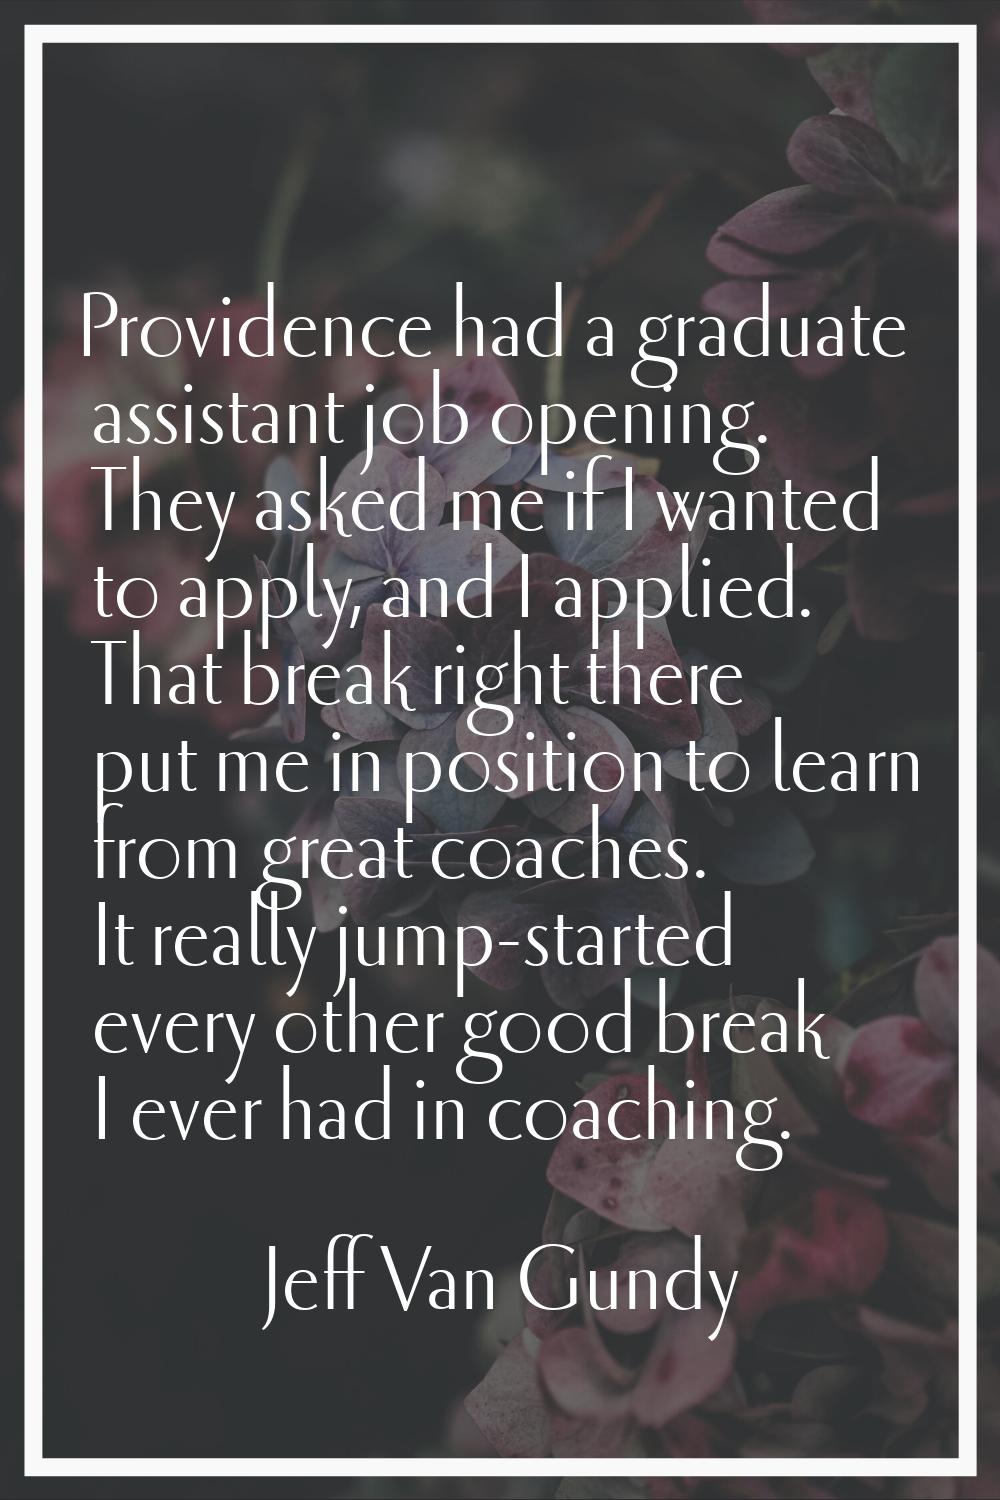 Providence had a graduate assistant job opening. They asked me if I wanted to apply, and I applied.